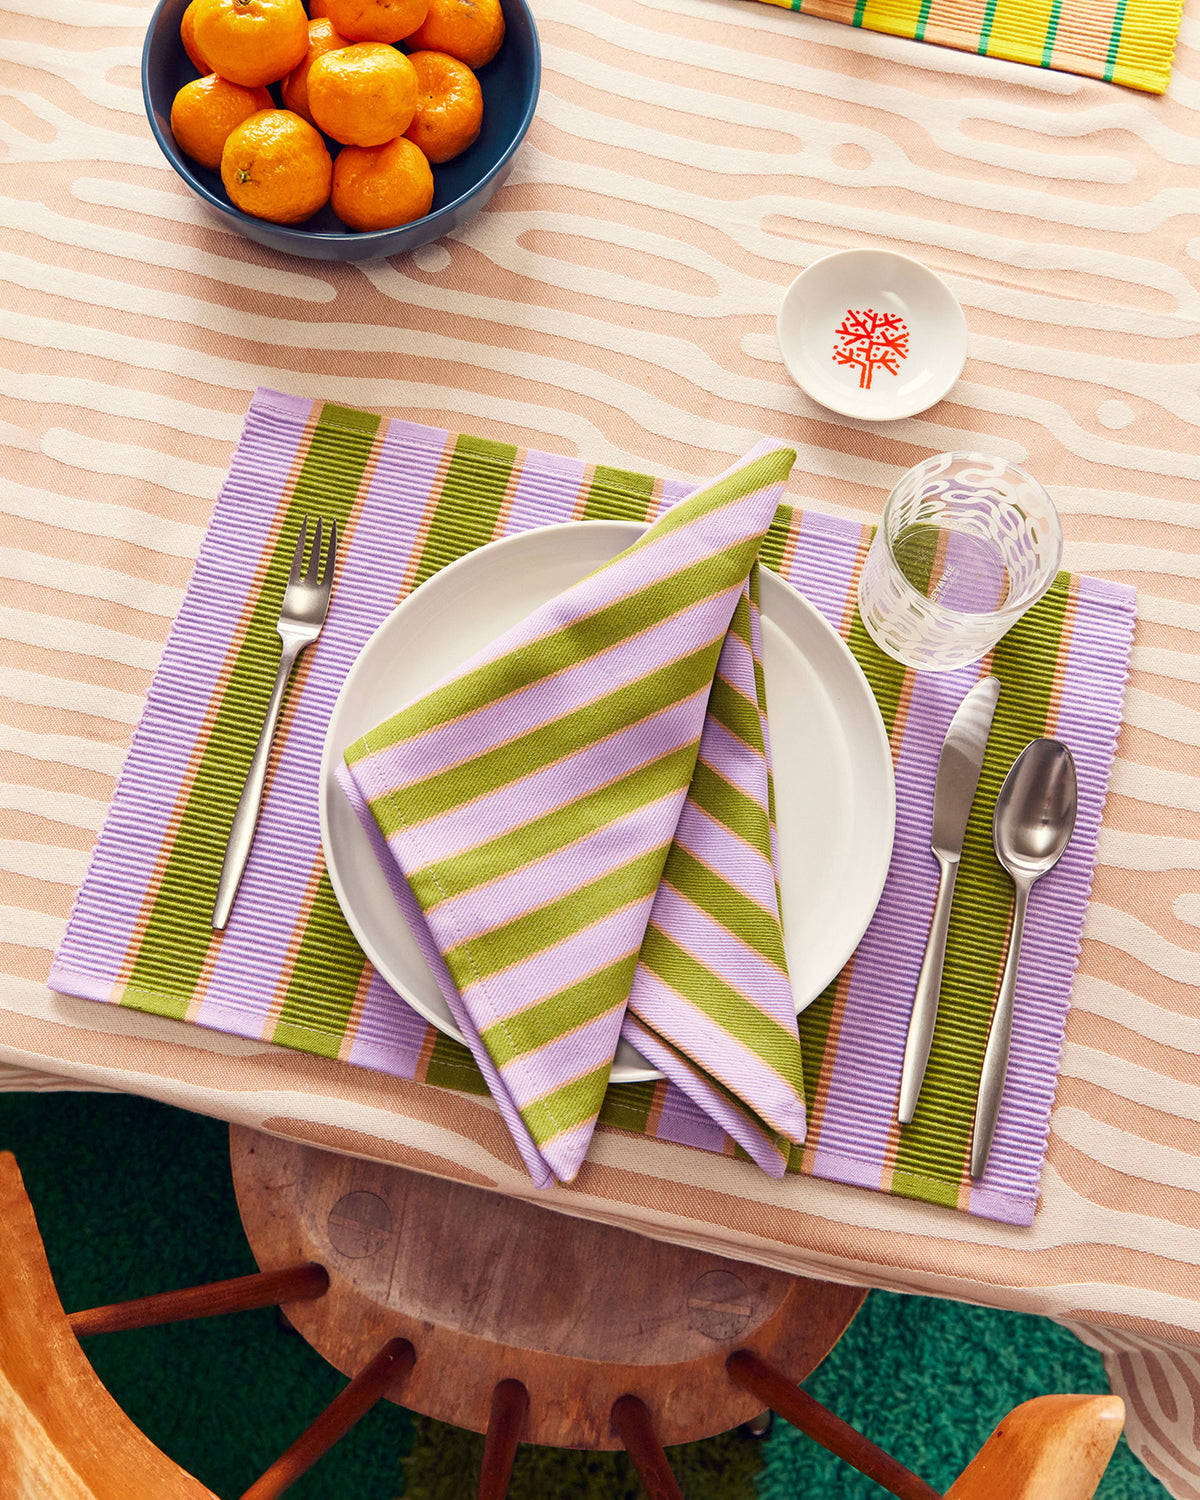 Dusen Dusen Herb Stripe Placemats. Single or Set of 4 placemats in mix and match striped patterns. Cotton placemats in tri-color stripes with a ribbed texture. 100% cotton, 12" x 18". Machine wash cold and lay flat to dry. Spot clean as needed. Made in India.